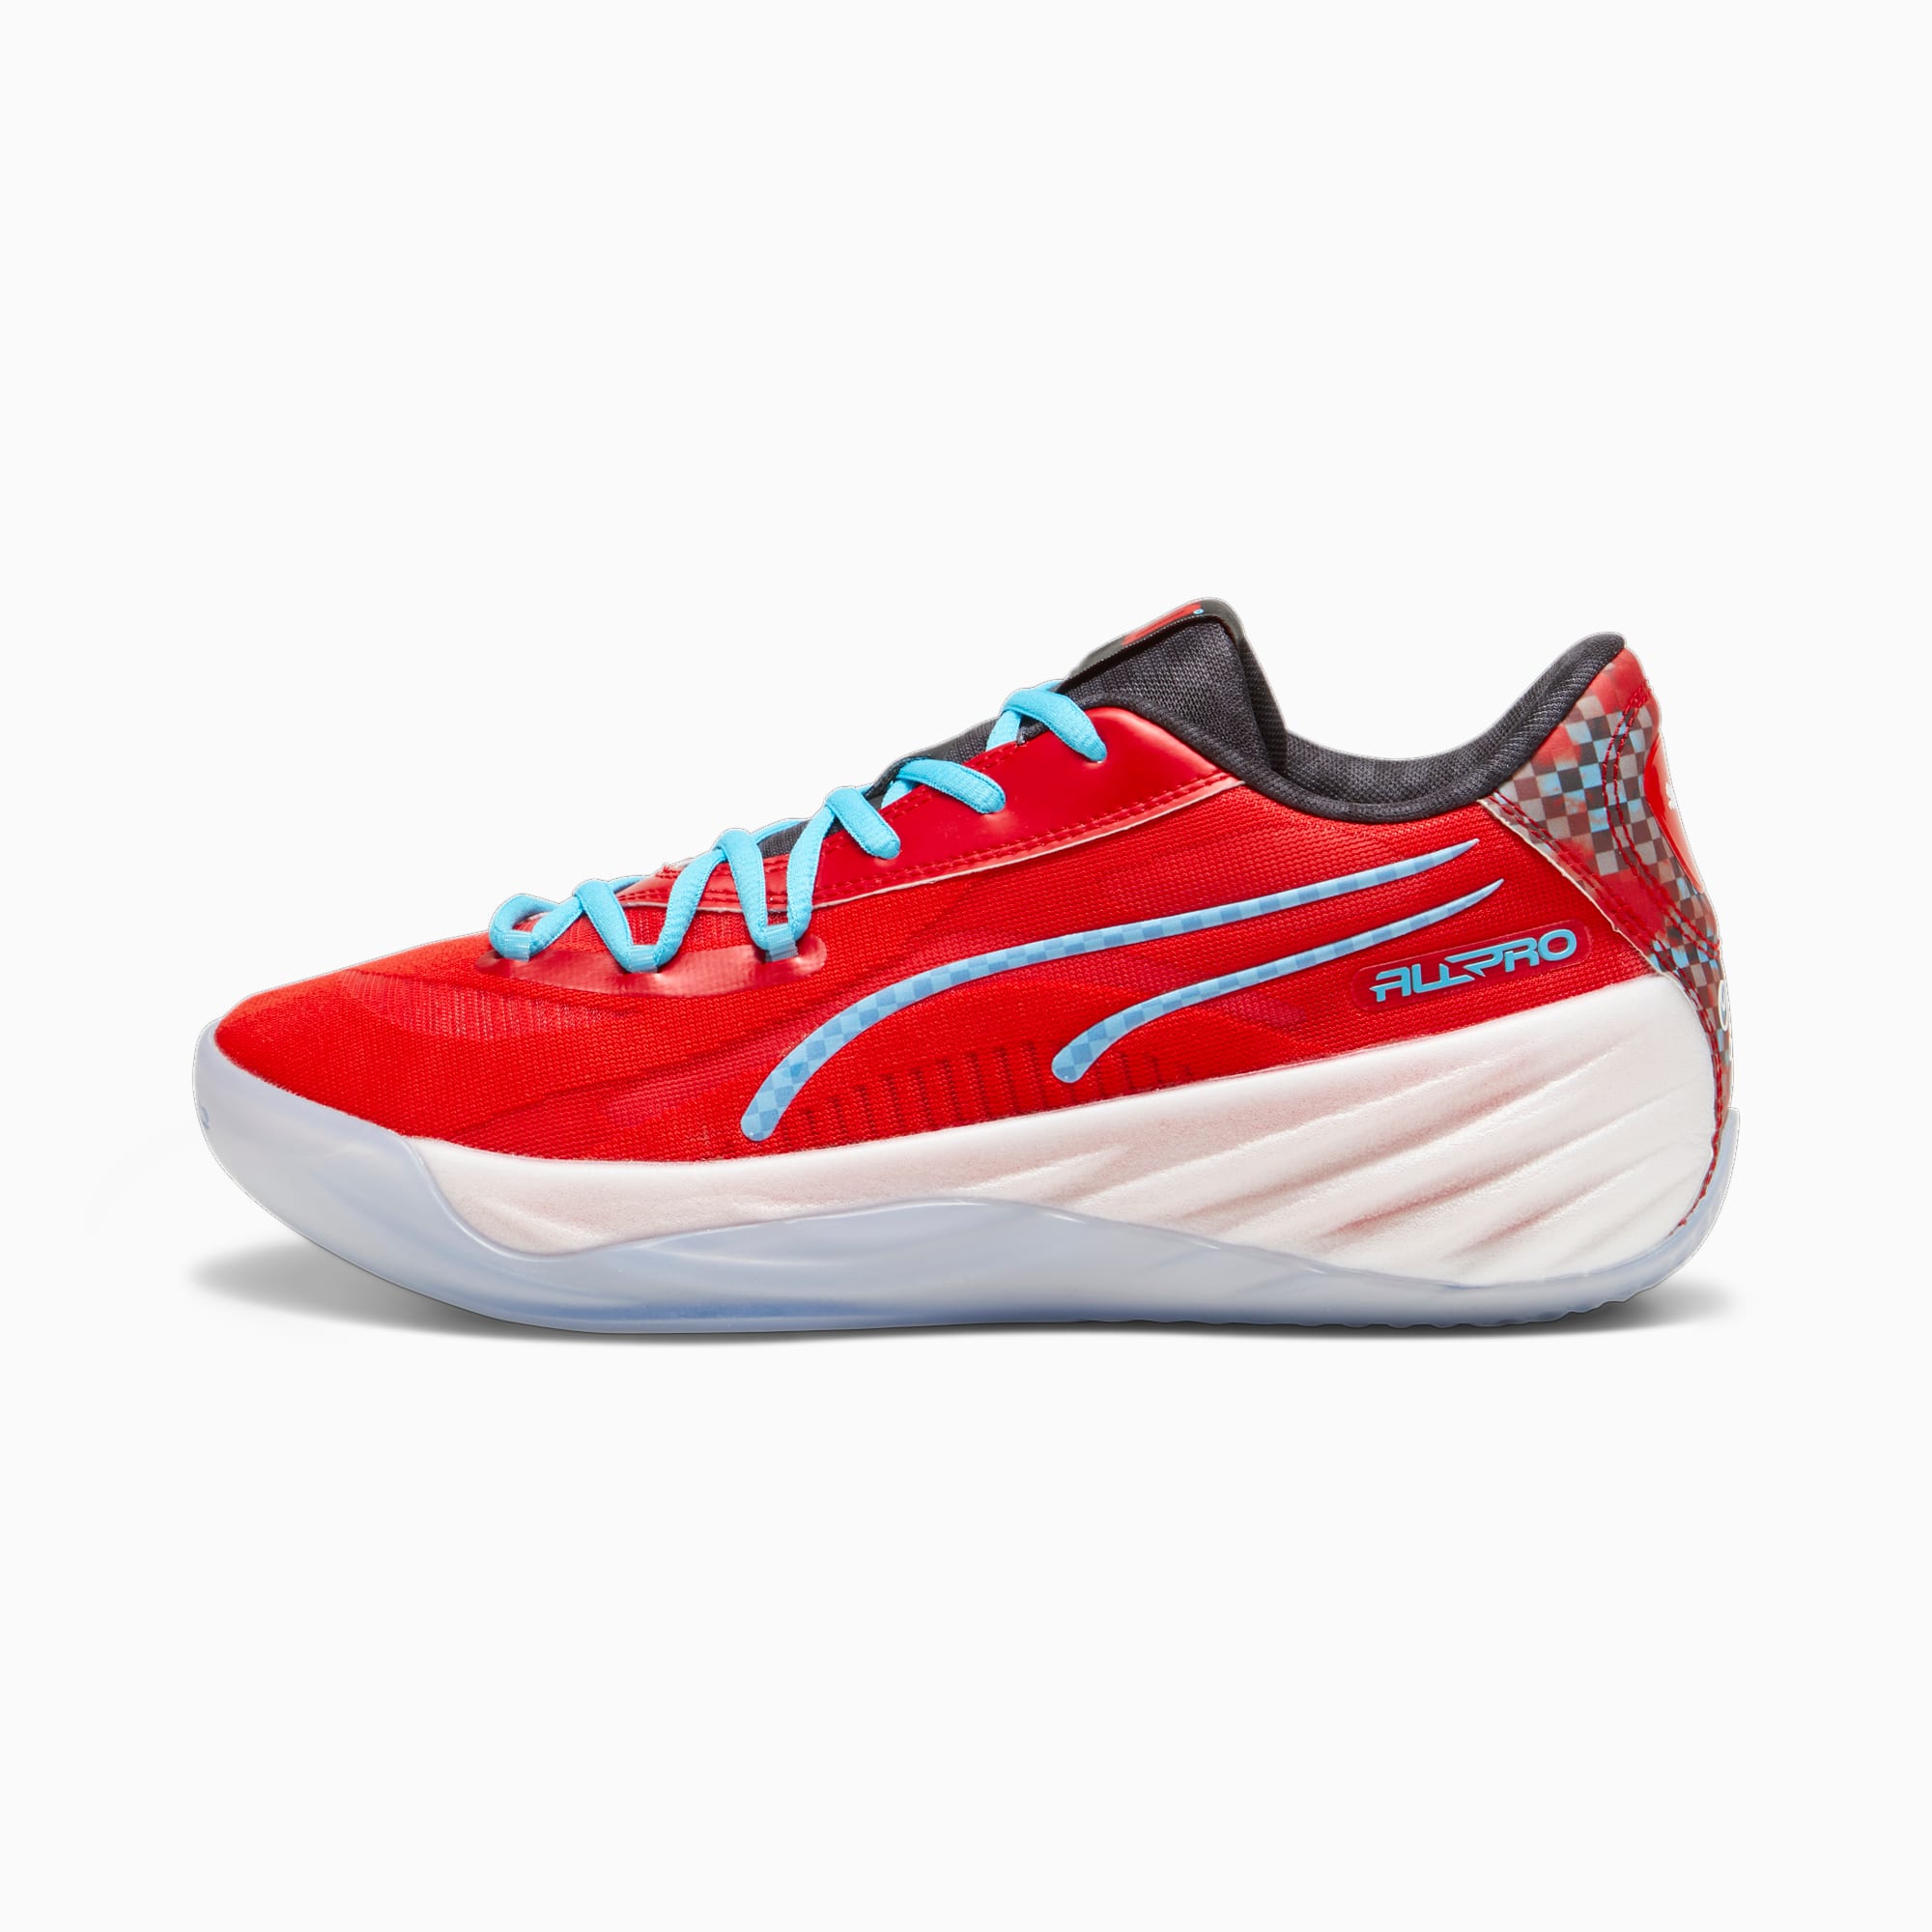 All-Pro NITRO Scoot Basketball Sneakers